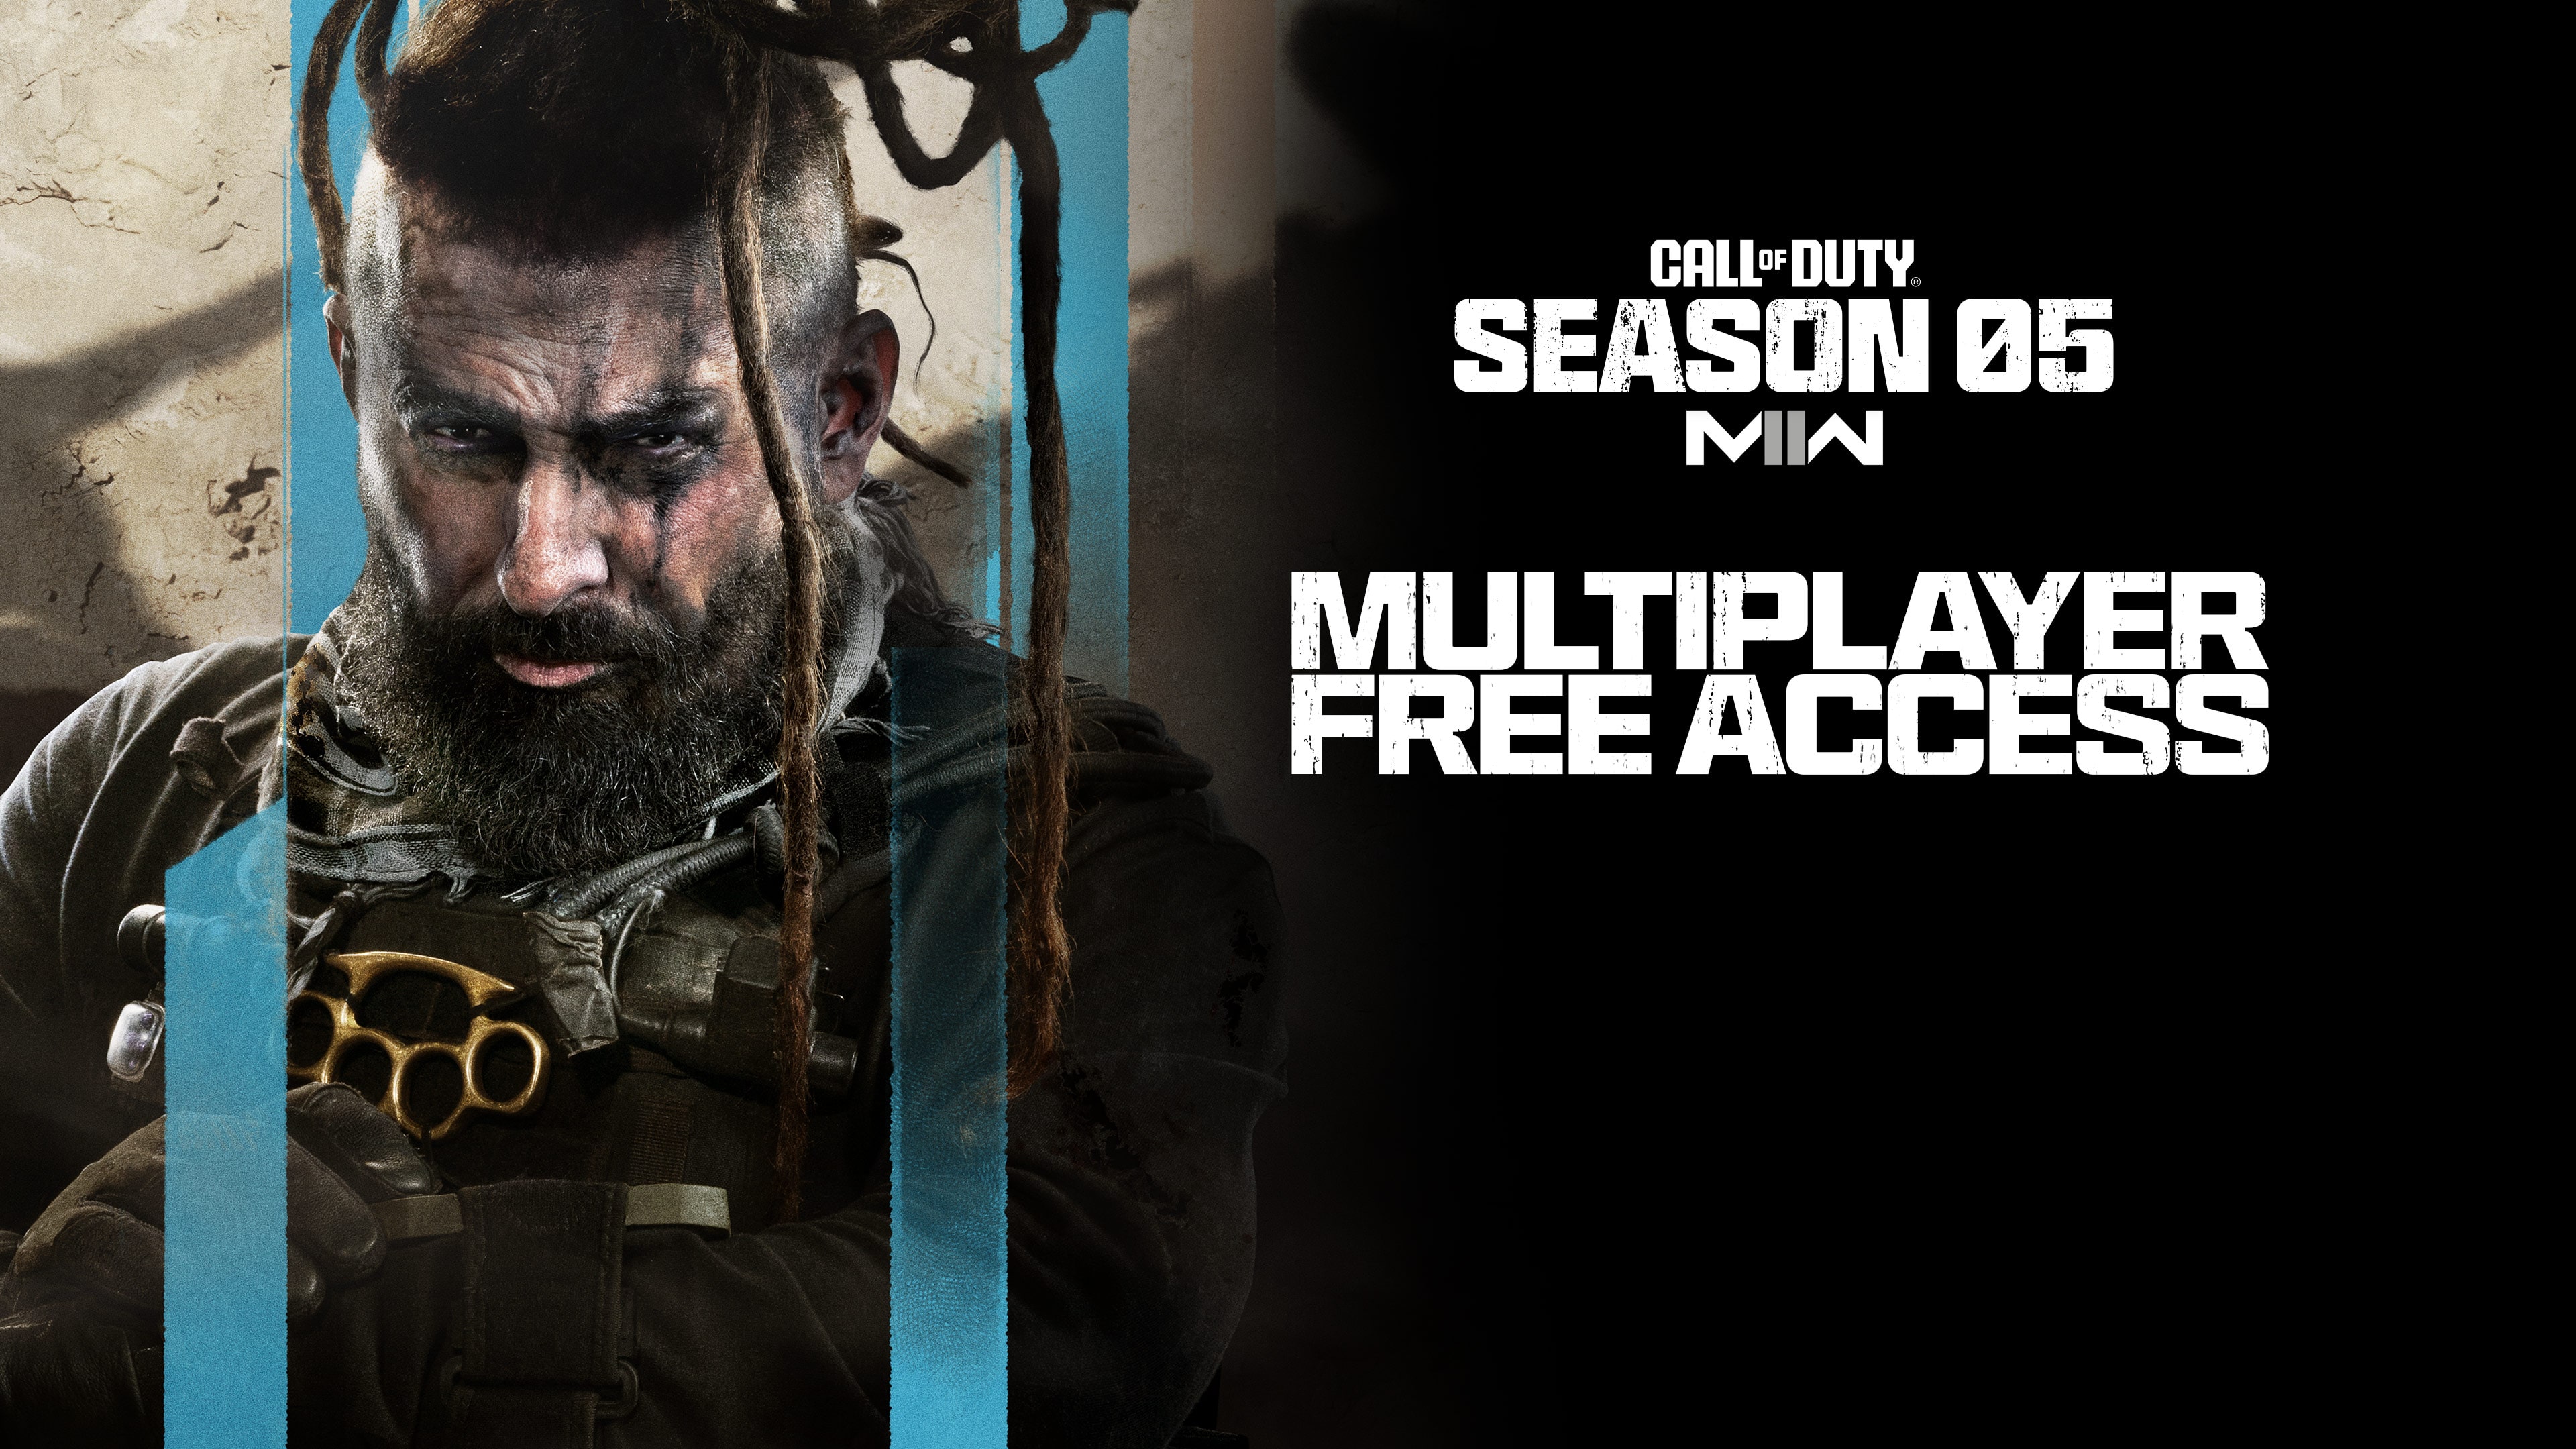 Multiplayer Free Access